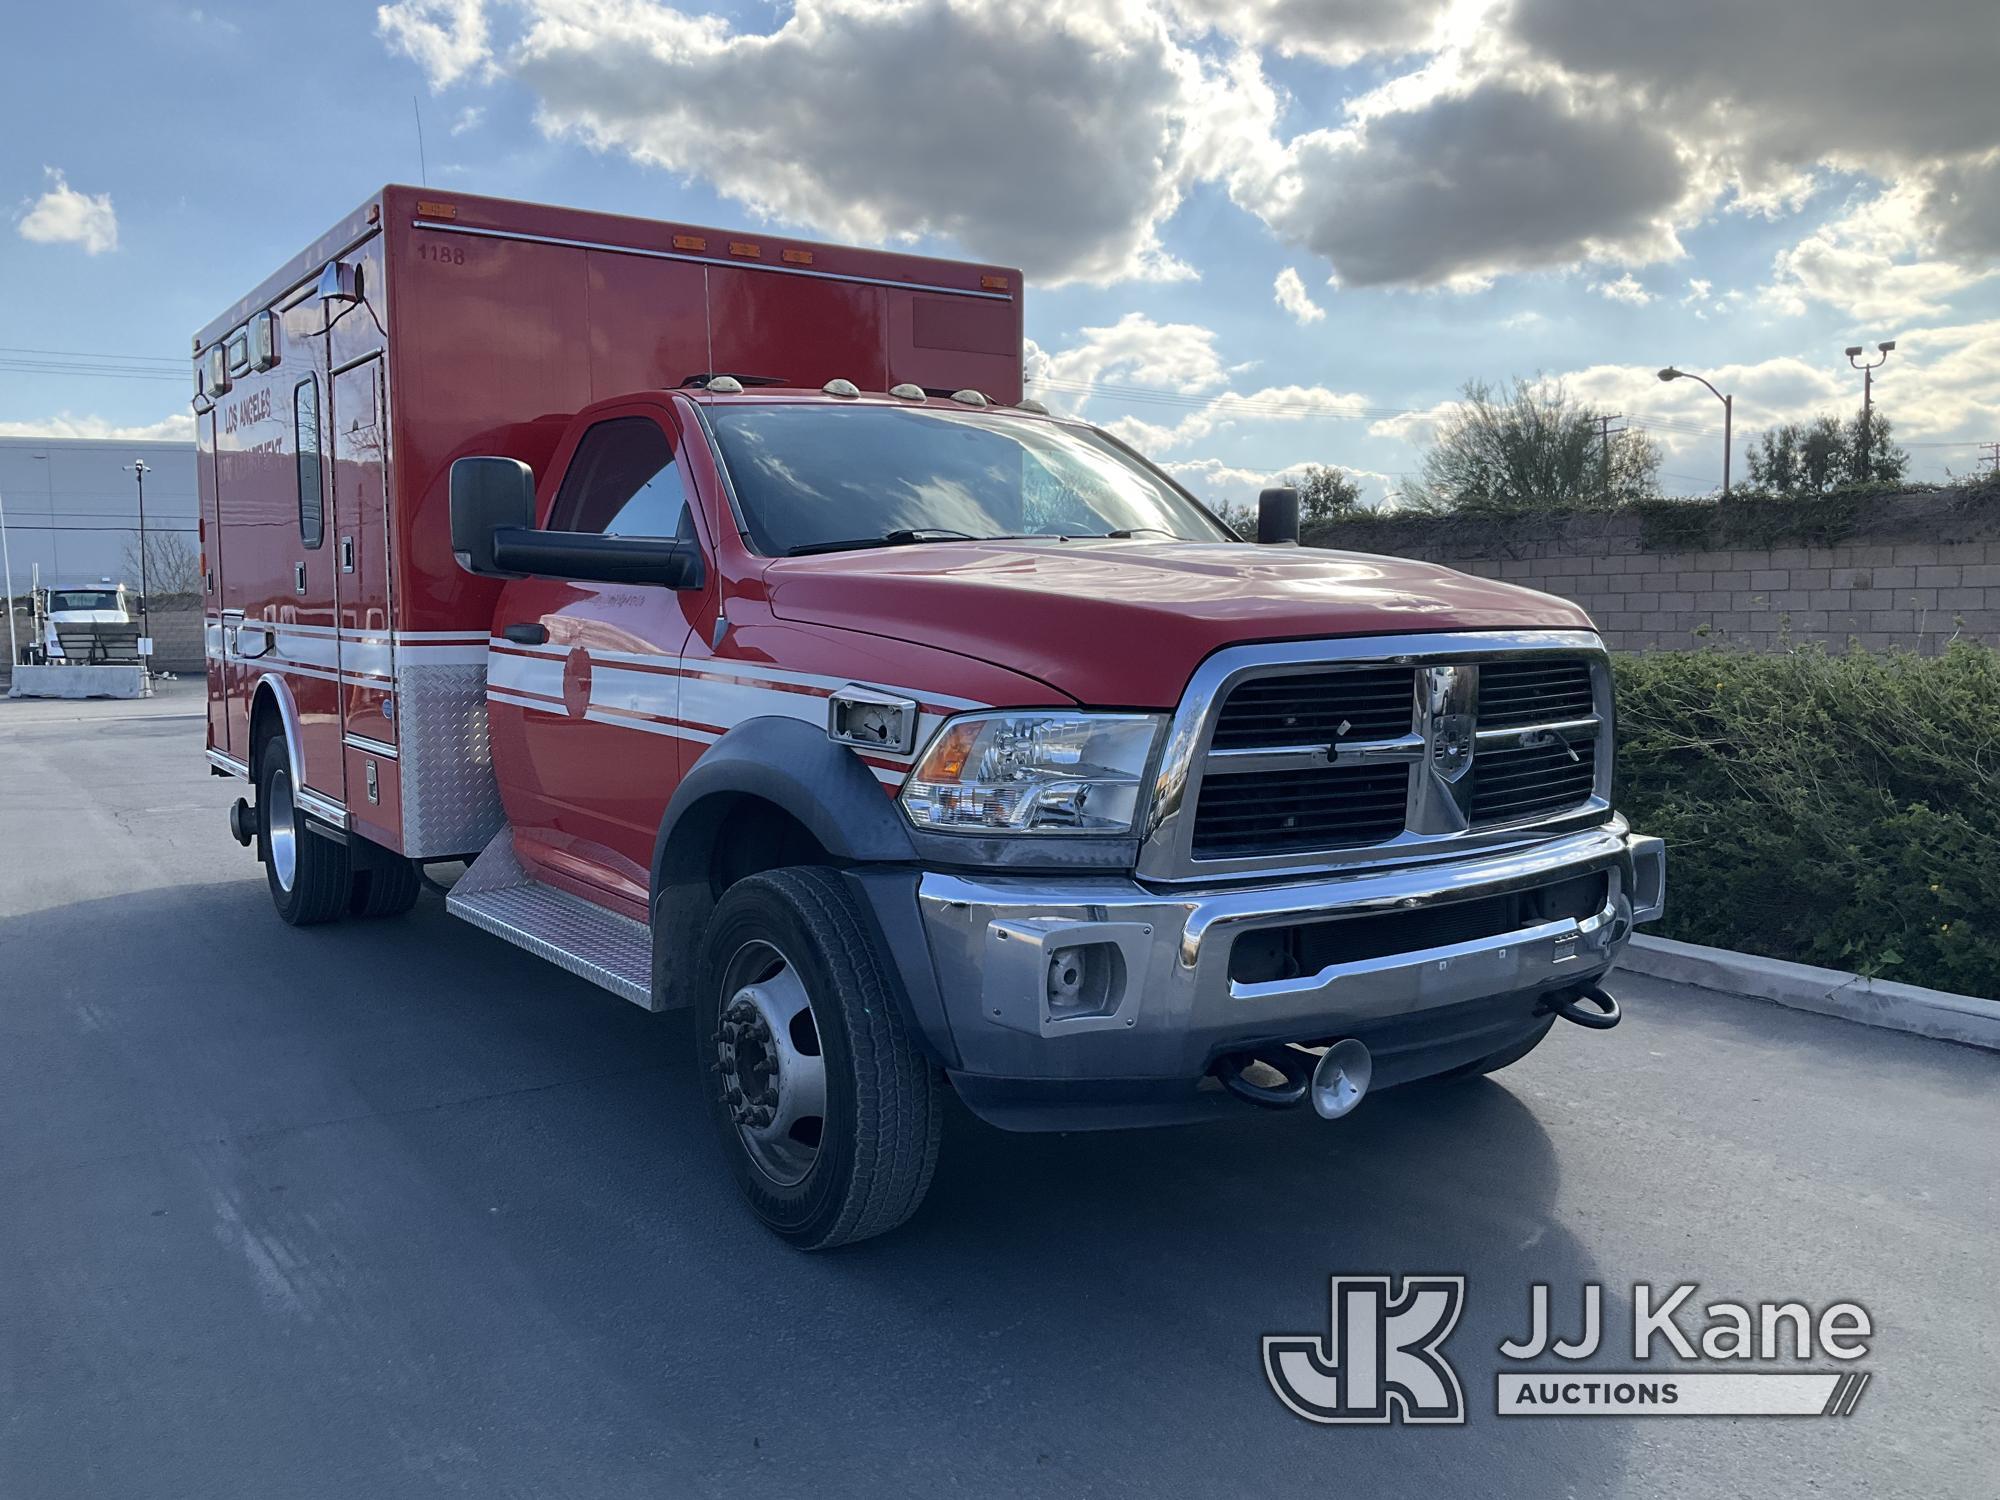 (Jurupa Valley, CA) 2012 Dodge Ram 4500 Cab & Chassis, Def system Runs & Moves Check Engine Light Is